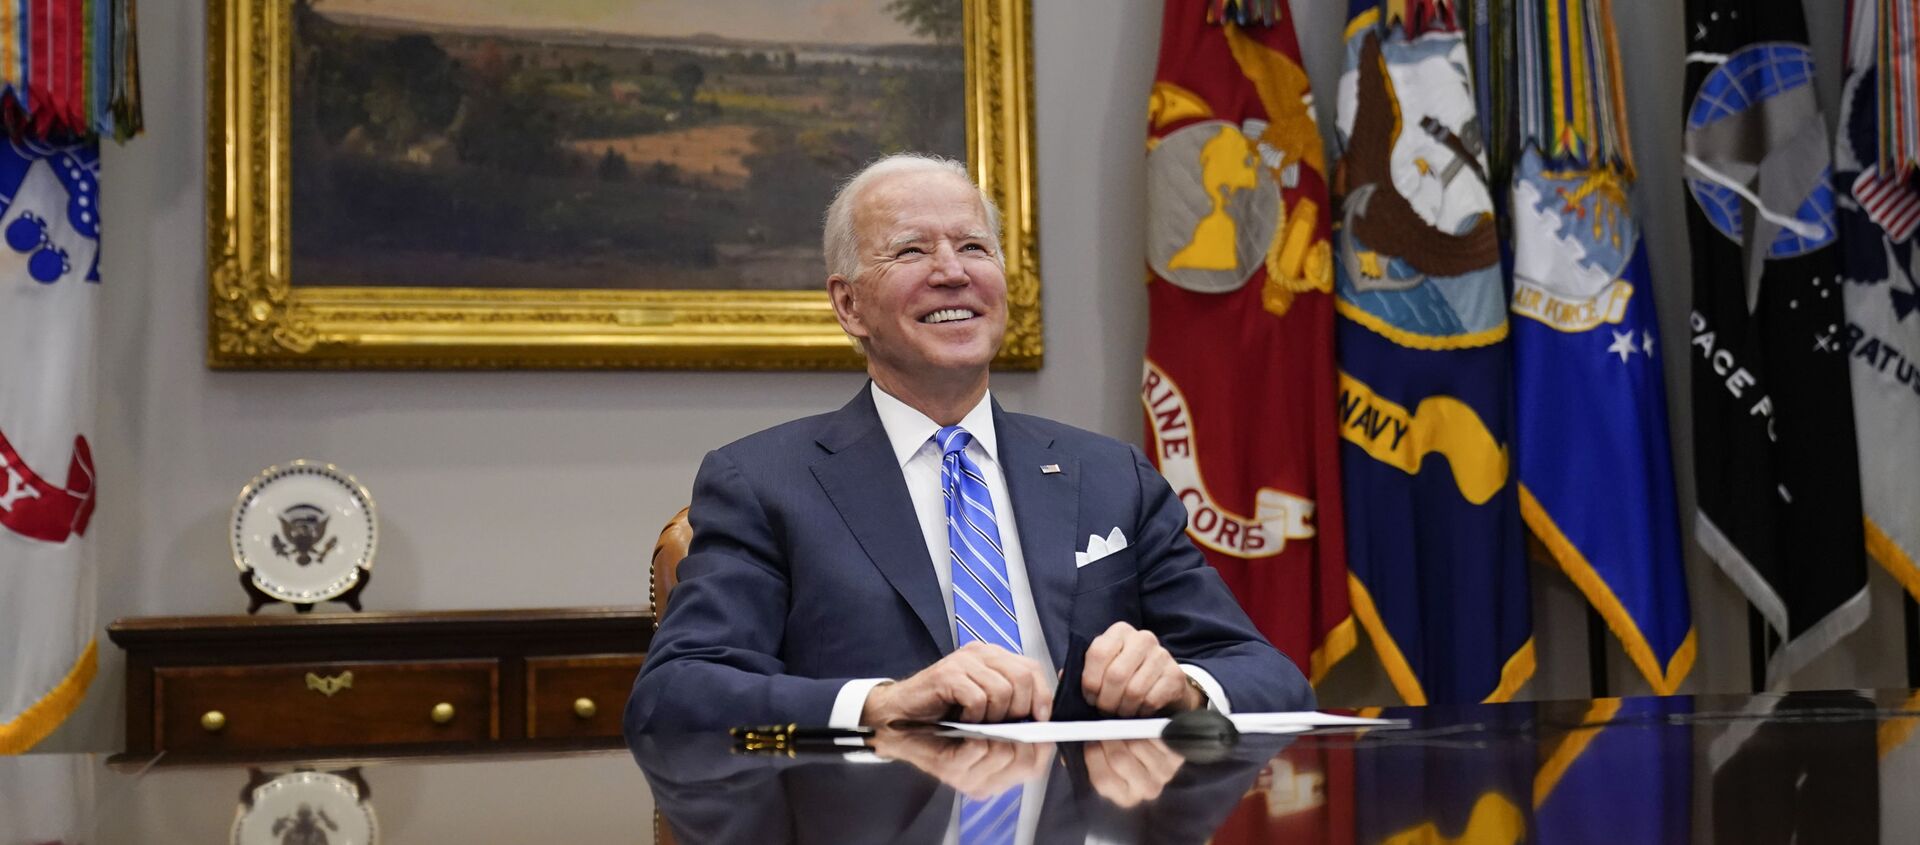 President Joe Biden congratulates NASA's Jet Propulsion Laboratory Mars 2020 Perseverance team for successfully landing on Mars during a virtual call in the Roosevelt Room at the White House, Thursday, March 4, 2021 - Sputnik International, 1920, 16.03.2021